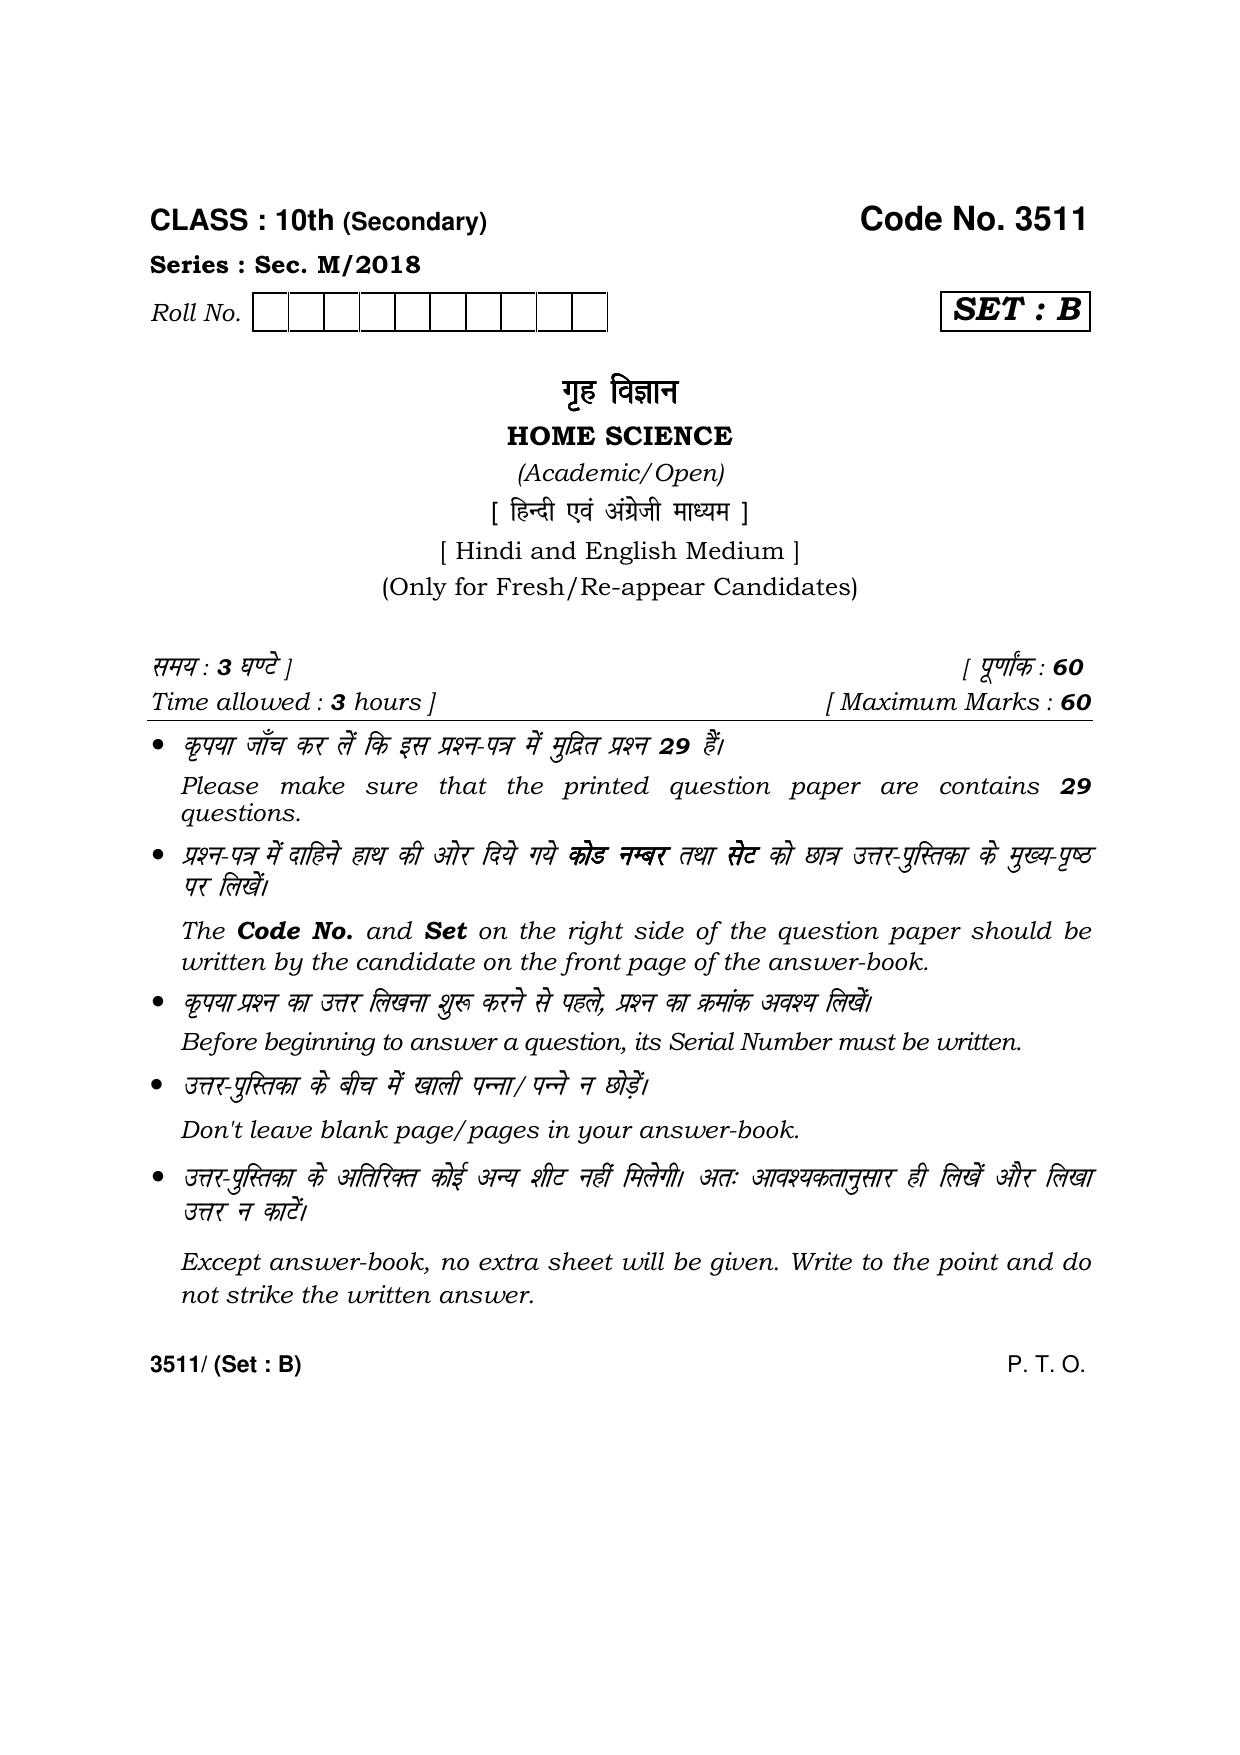 Haryana Board HBSE Class 10 Home Science -B 2018 Question Paper - Page 1